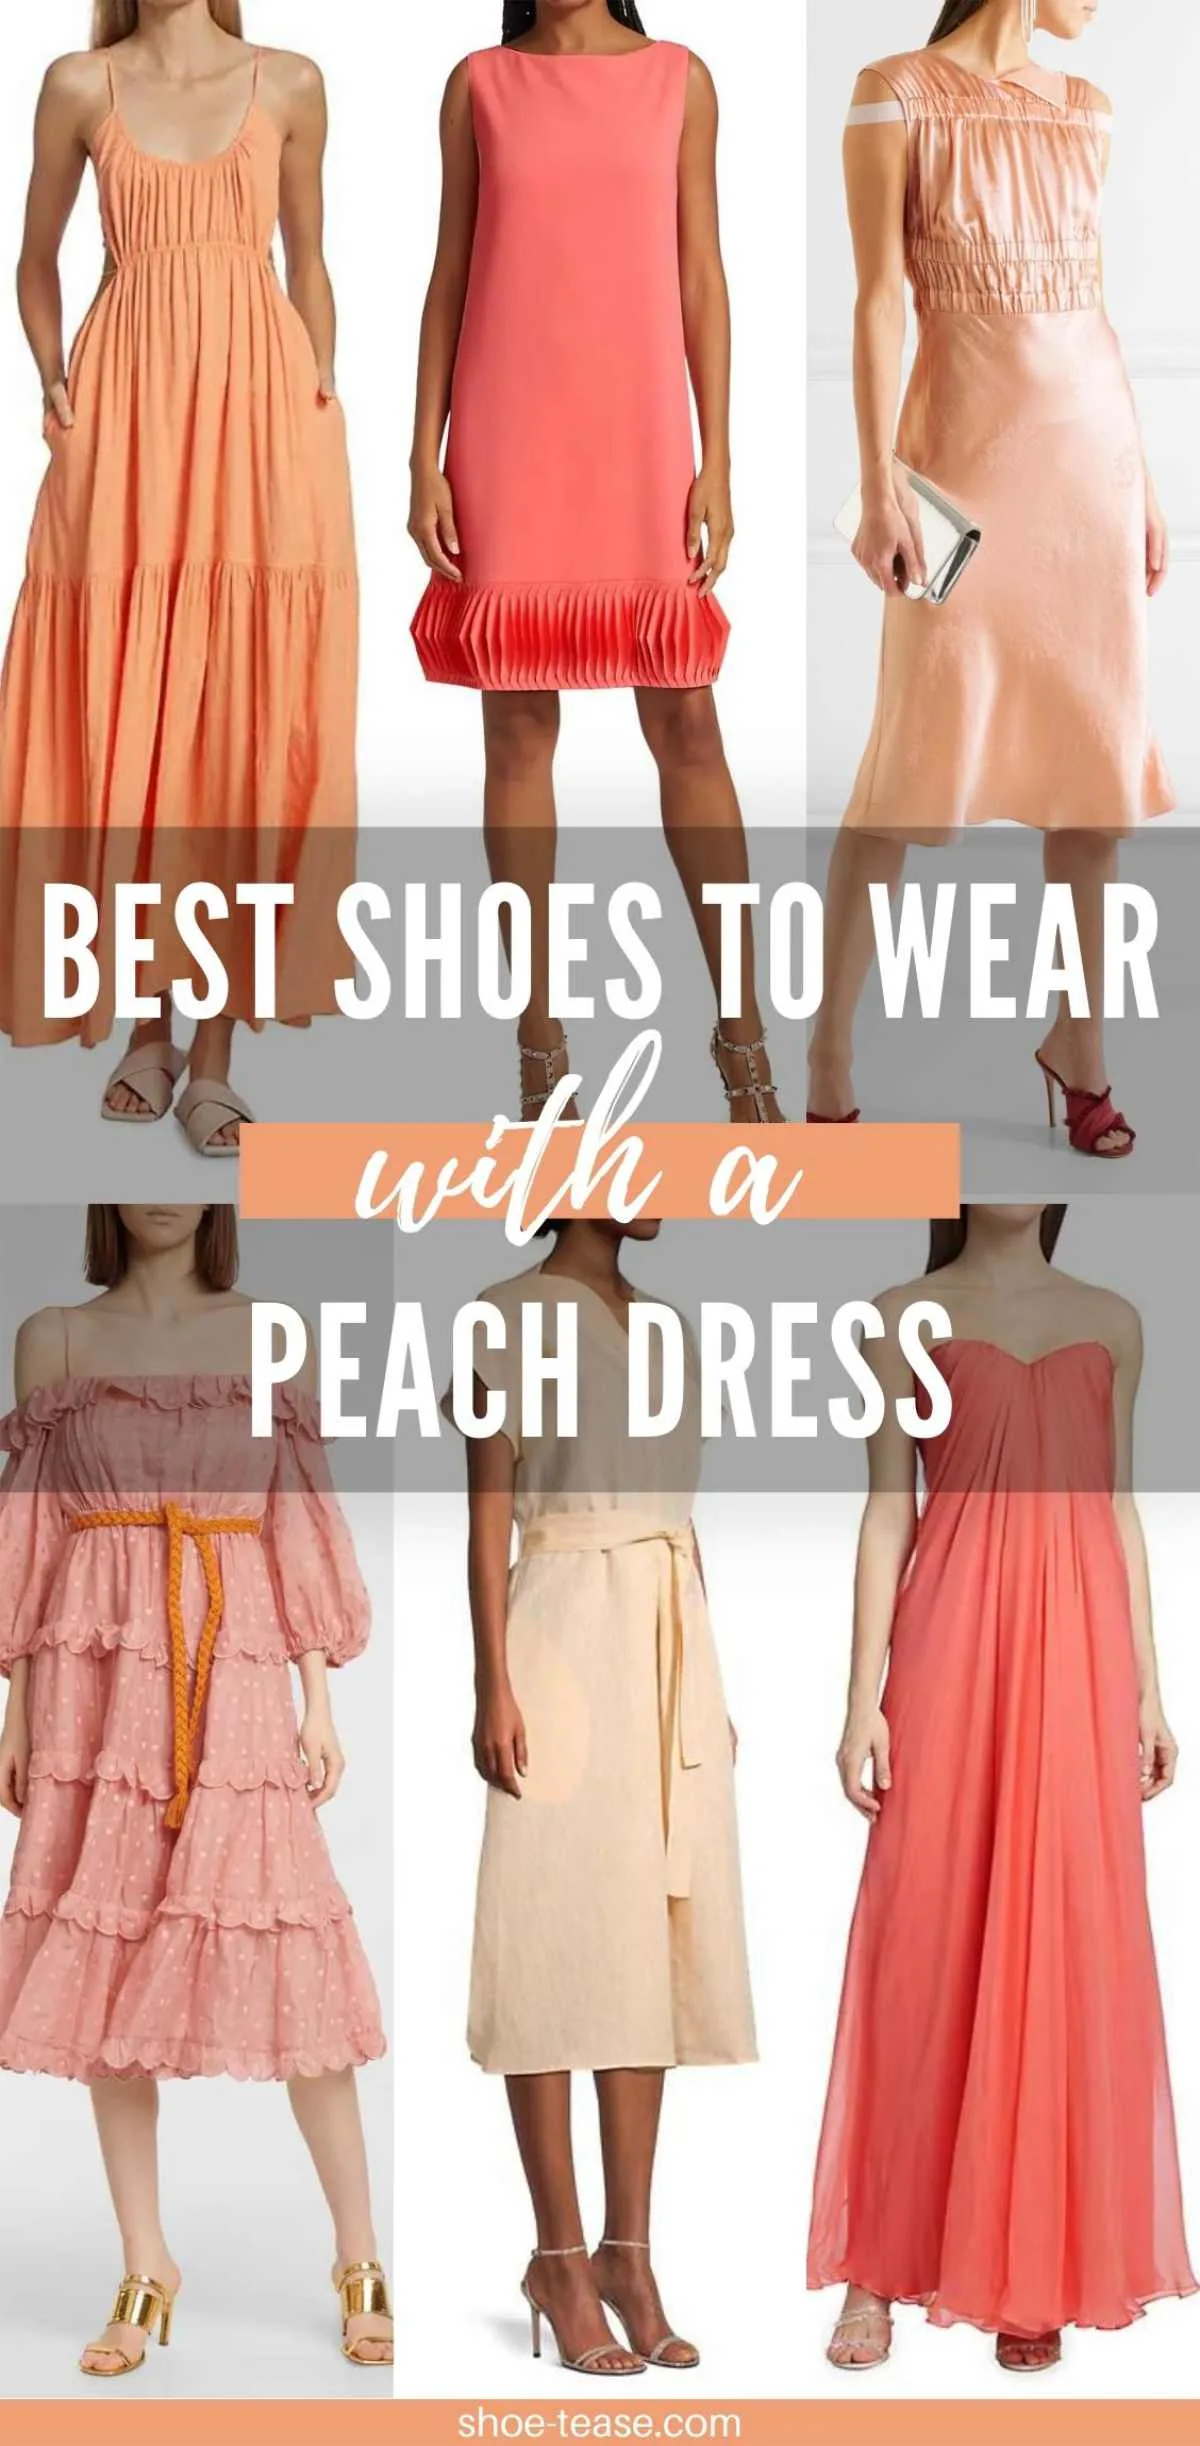 Best Color Shoes to Wear with a Peach Dress.jpg